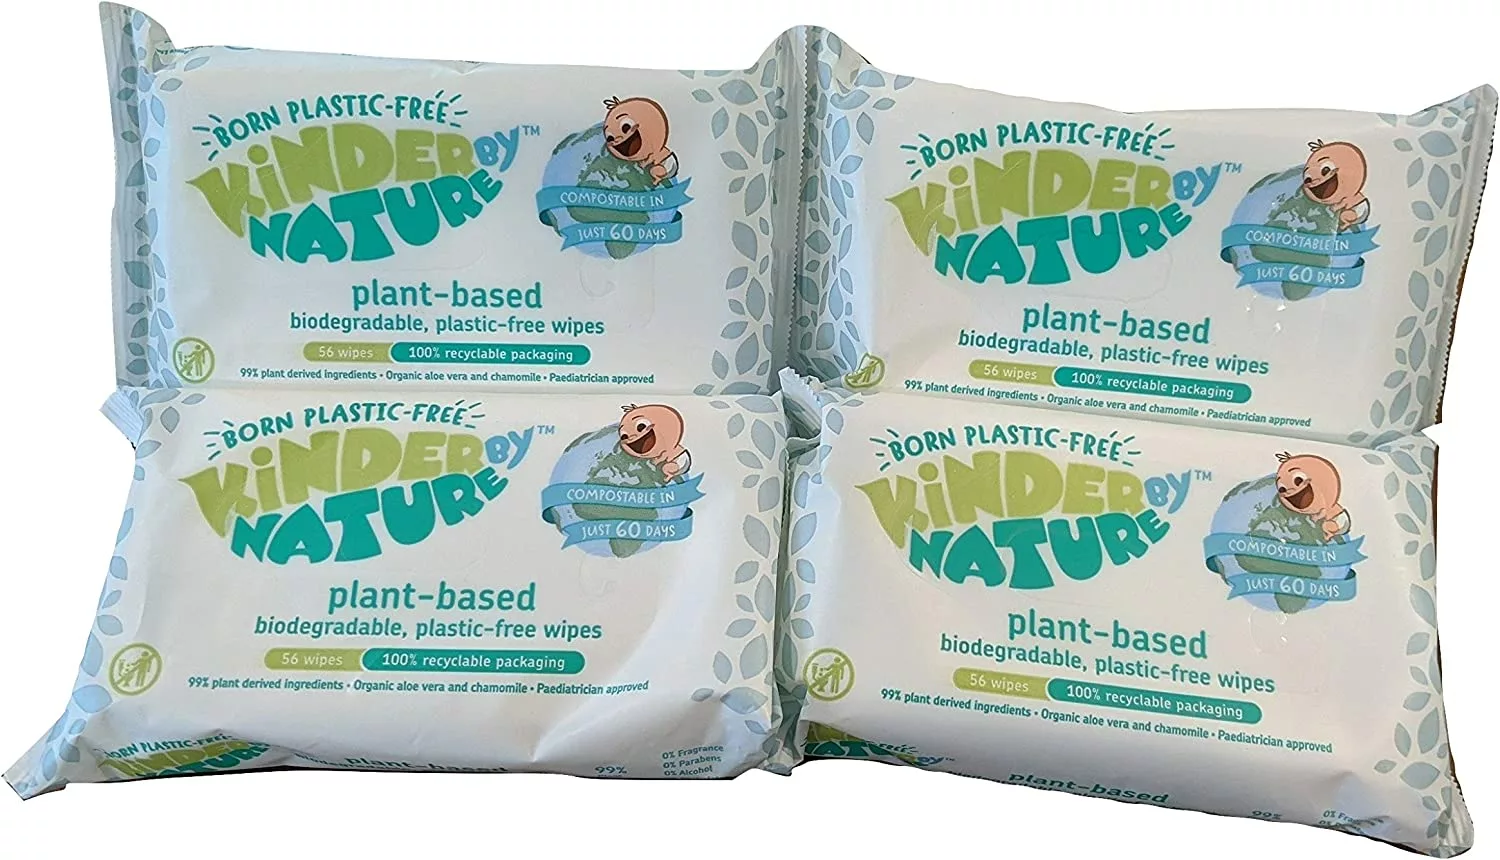 Jackson Reece Kinder by Nature Baby Wipes